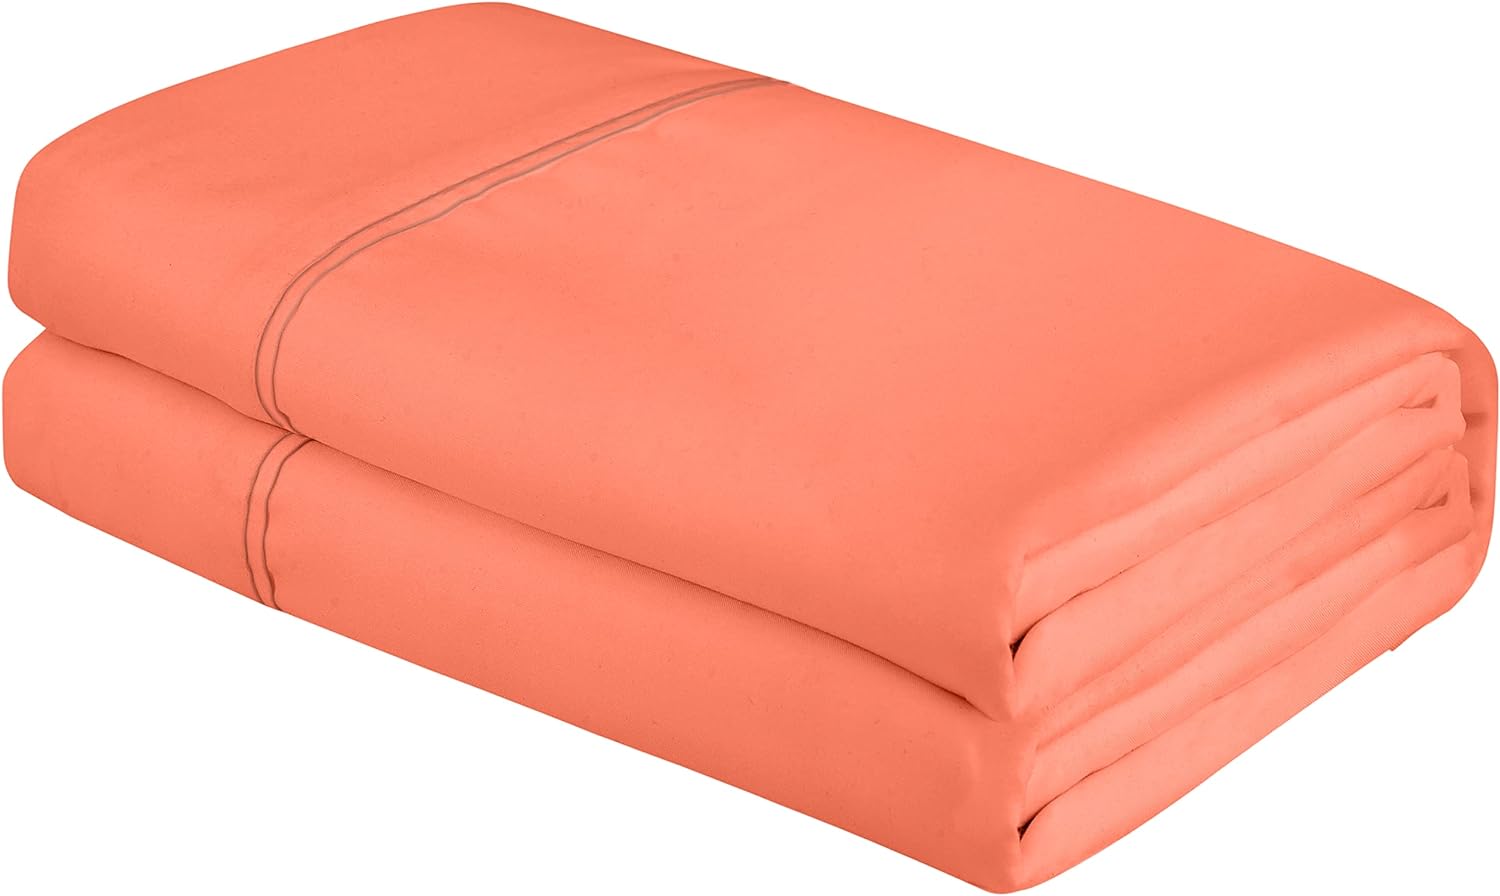 Royale Linens Full Size Flat Sheet Only - Brushed 1800 Microfiber - Ultra Soft & Breathable - Wrinkle & Stain Resistant - Hotel Quality Flat Sheet Sold Separately - Top Sheet for Bed - (Full, Coral)